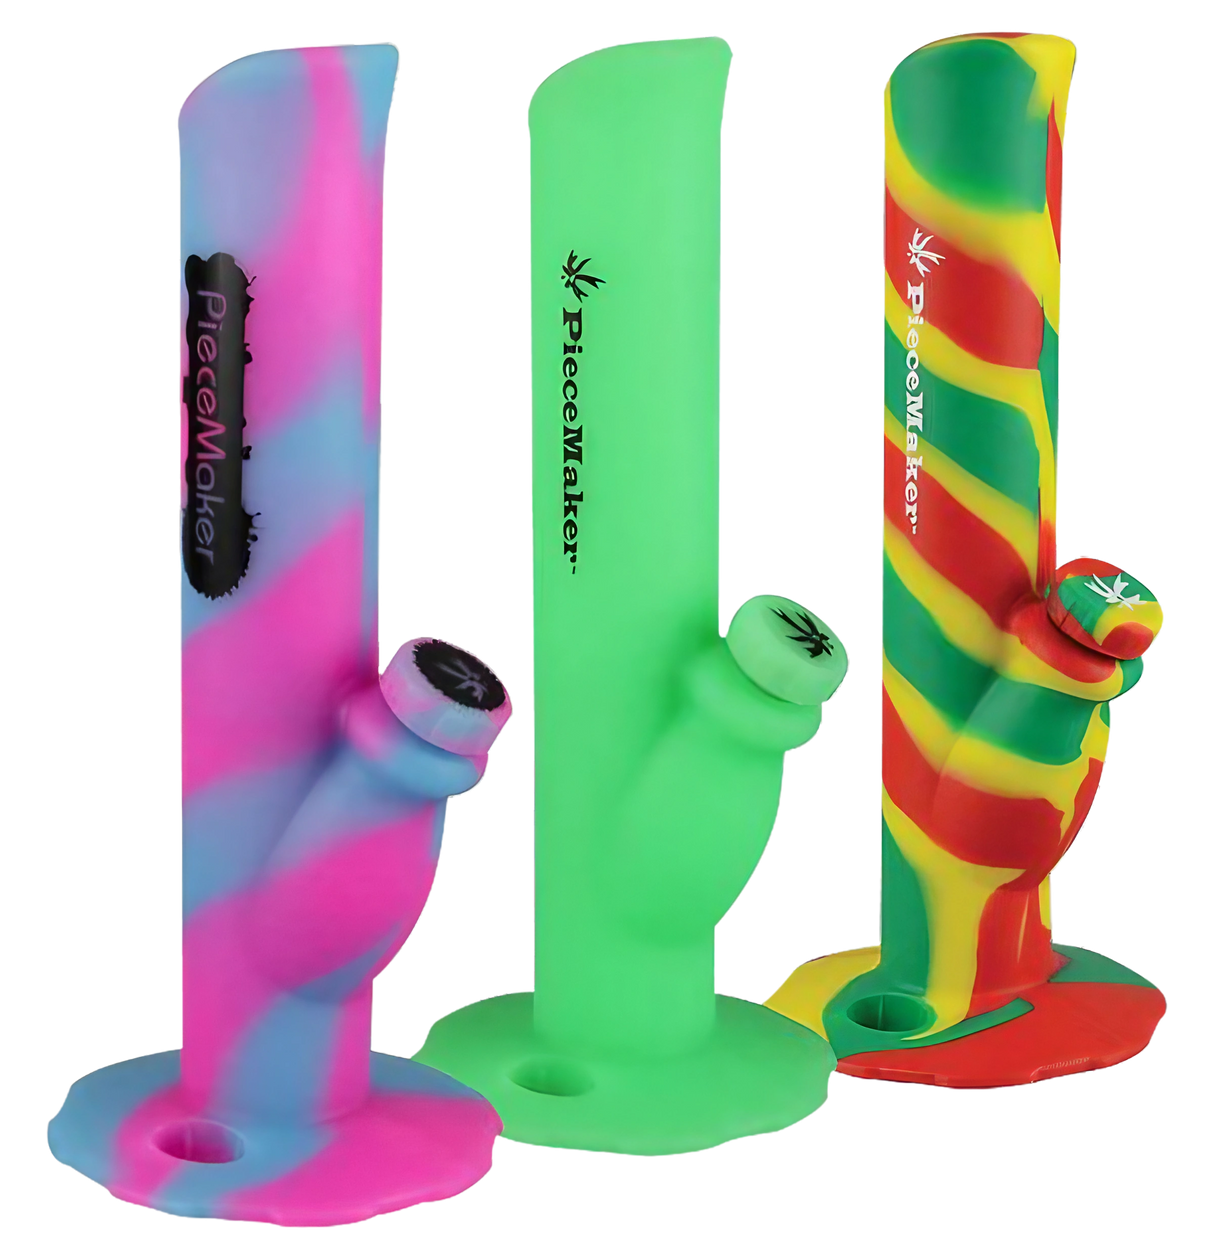 PieceMaker Kermit Silicone Water Pipes in tie-dye, green, and Rasta colors, front view